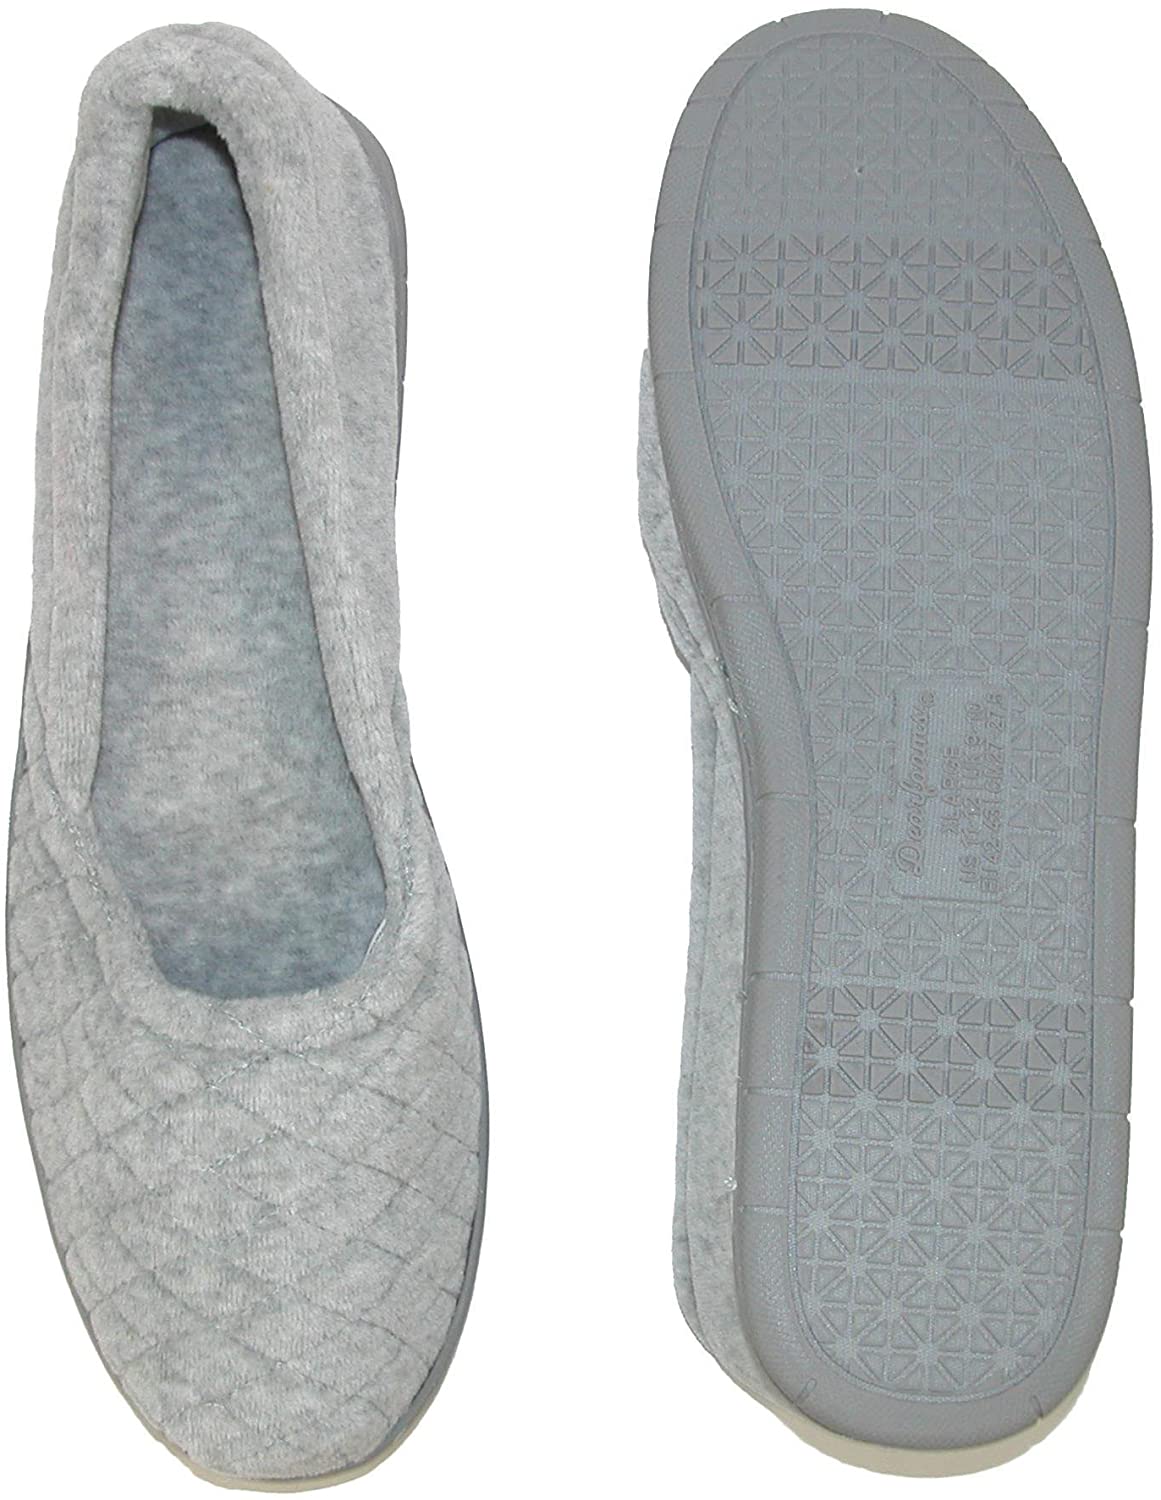 Dearfoams Womens Quilted Microfiber Velour Slippers